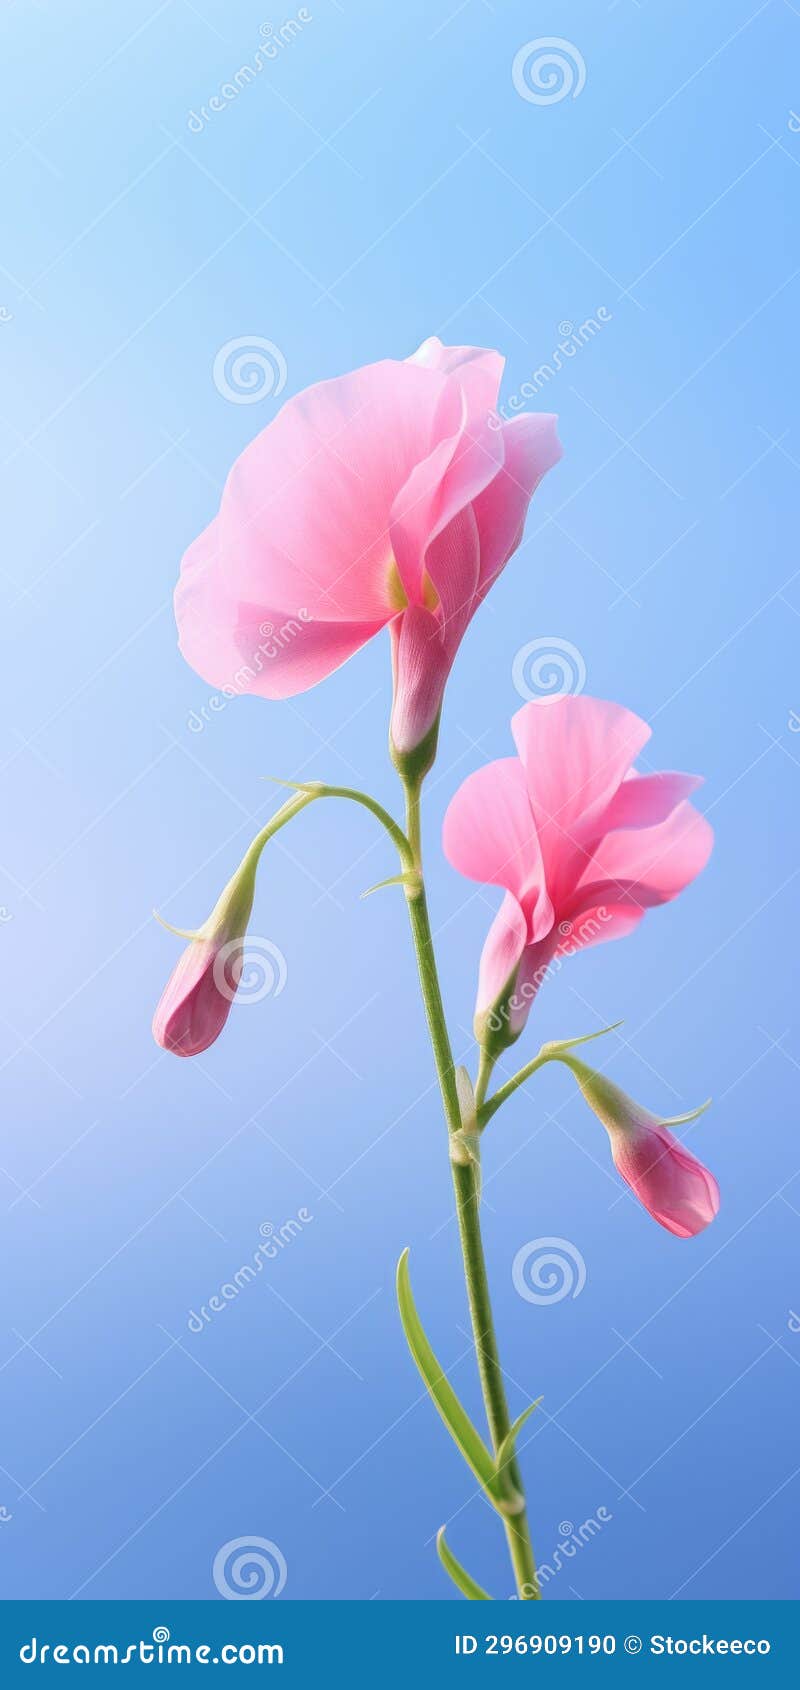 minimalist sweet pea mobile wallpaper for posh and lg zx